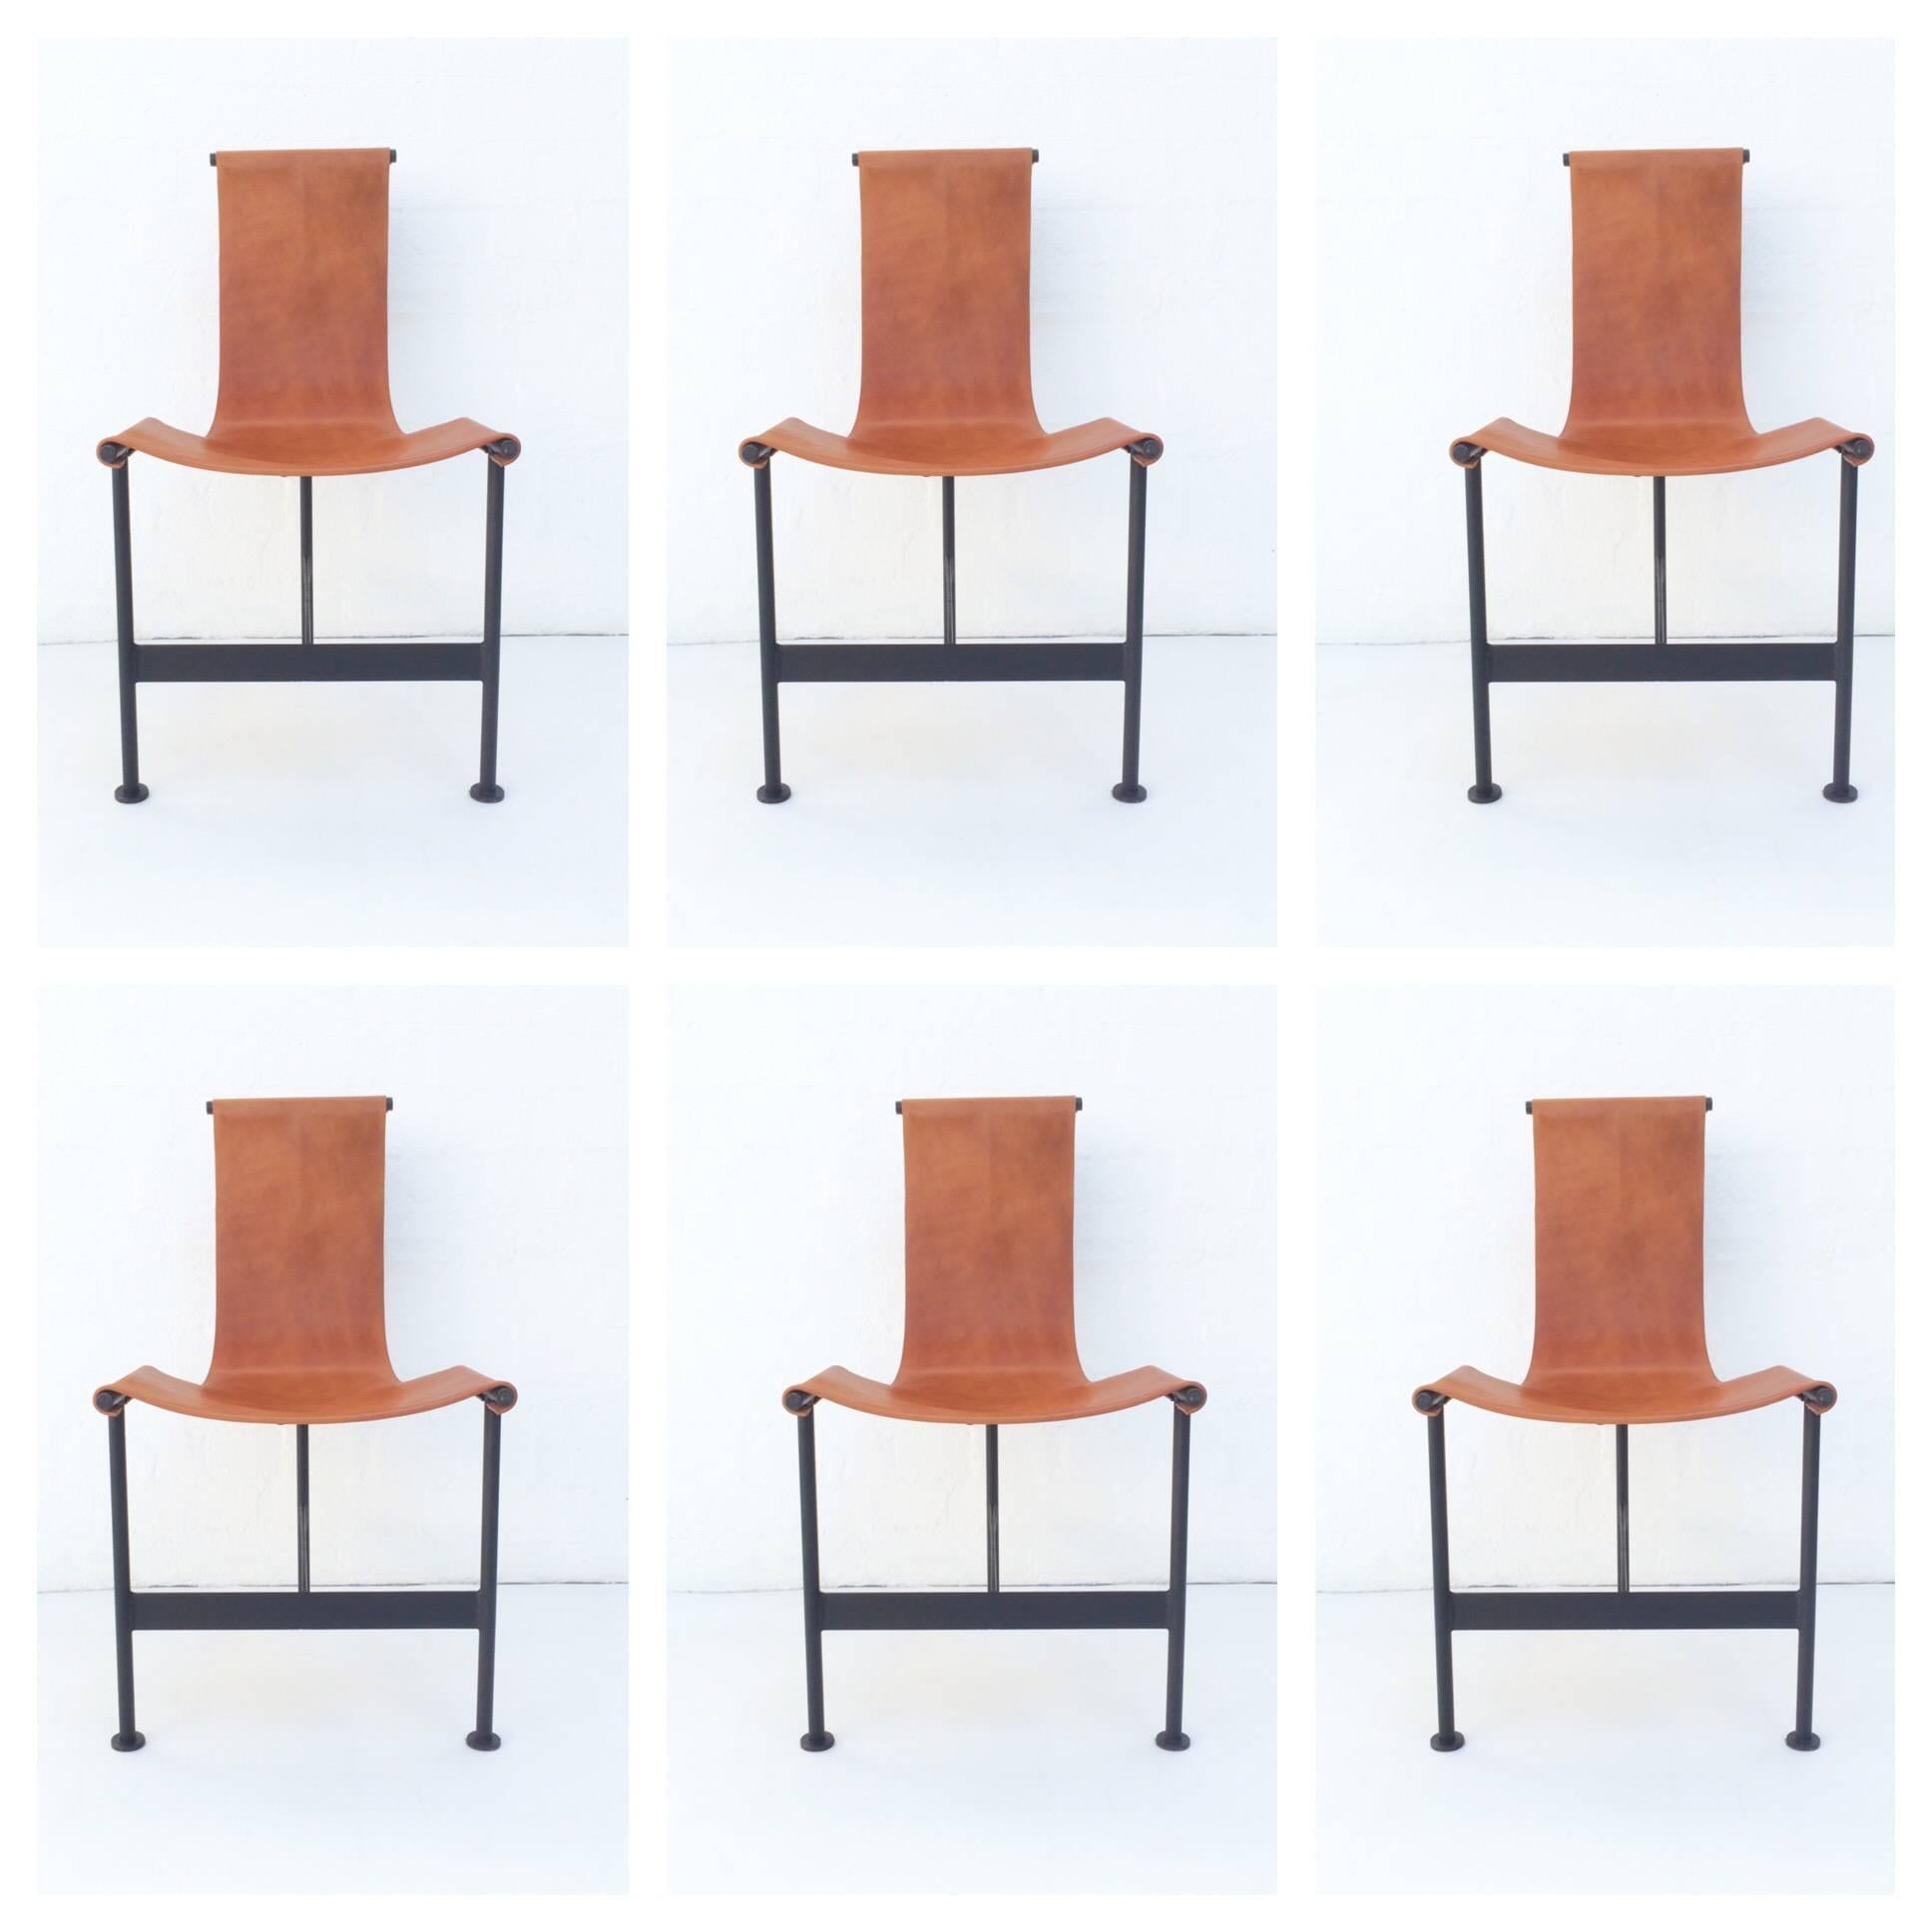 Set of six exceptional leather sling dining chairs.
Possible attribution to Giorgio Belloli (Italian designer) invited by Mexico Government to inspire design.
These chairs are a great example of Mexican modernism!
All six chairs have new leather